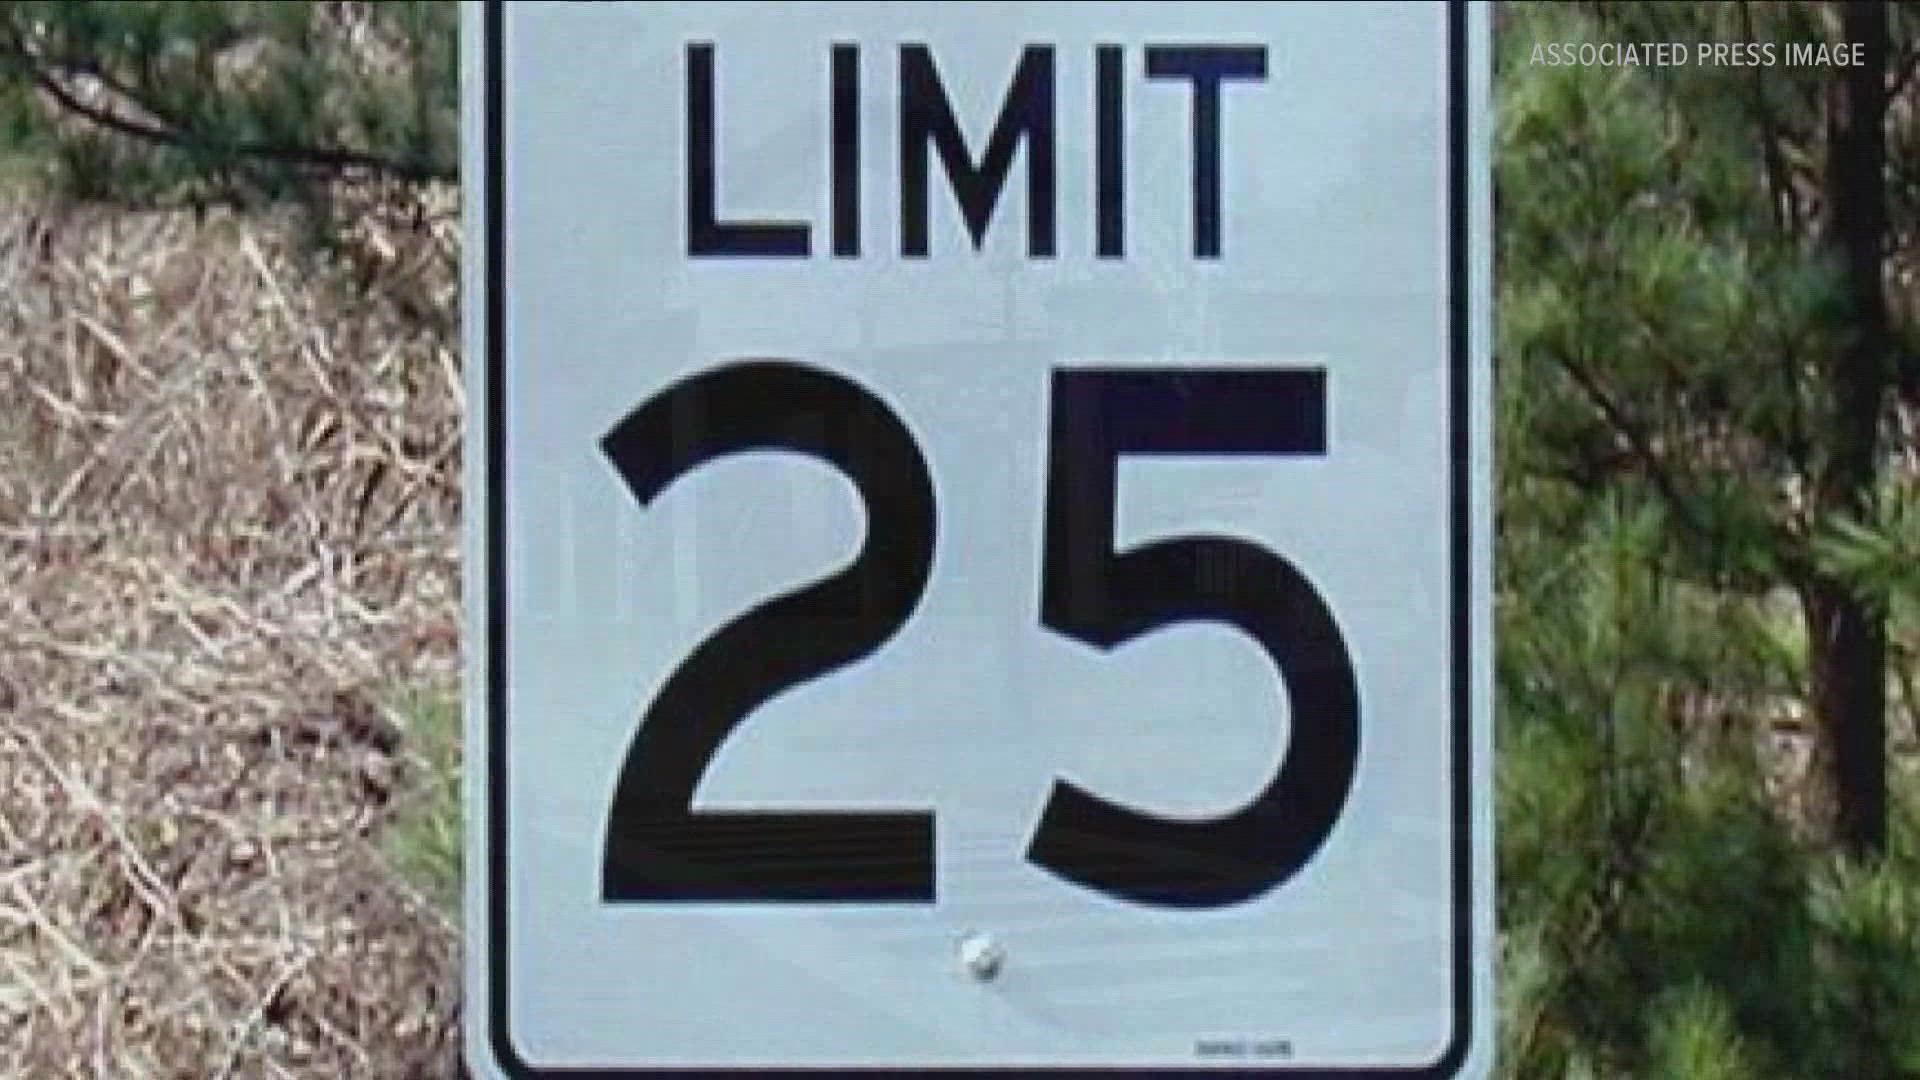 The move comes six days after the state authorized municipalities to lower maximum speed limits to 25 miles per hour.